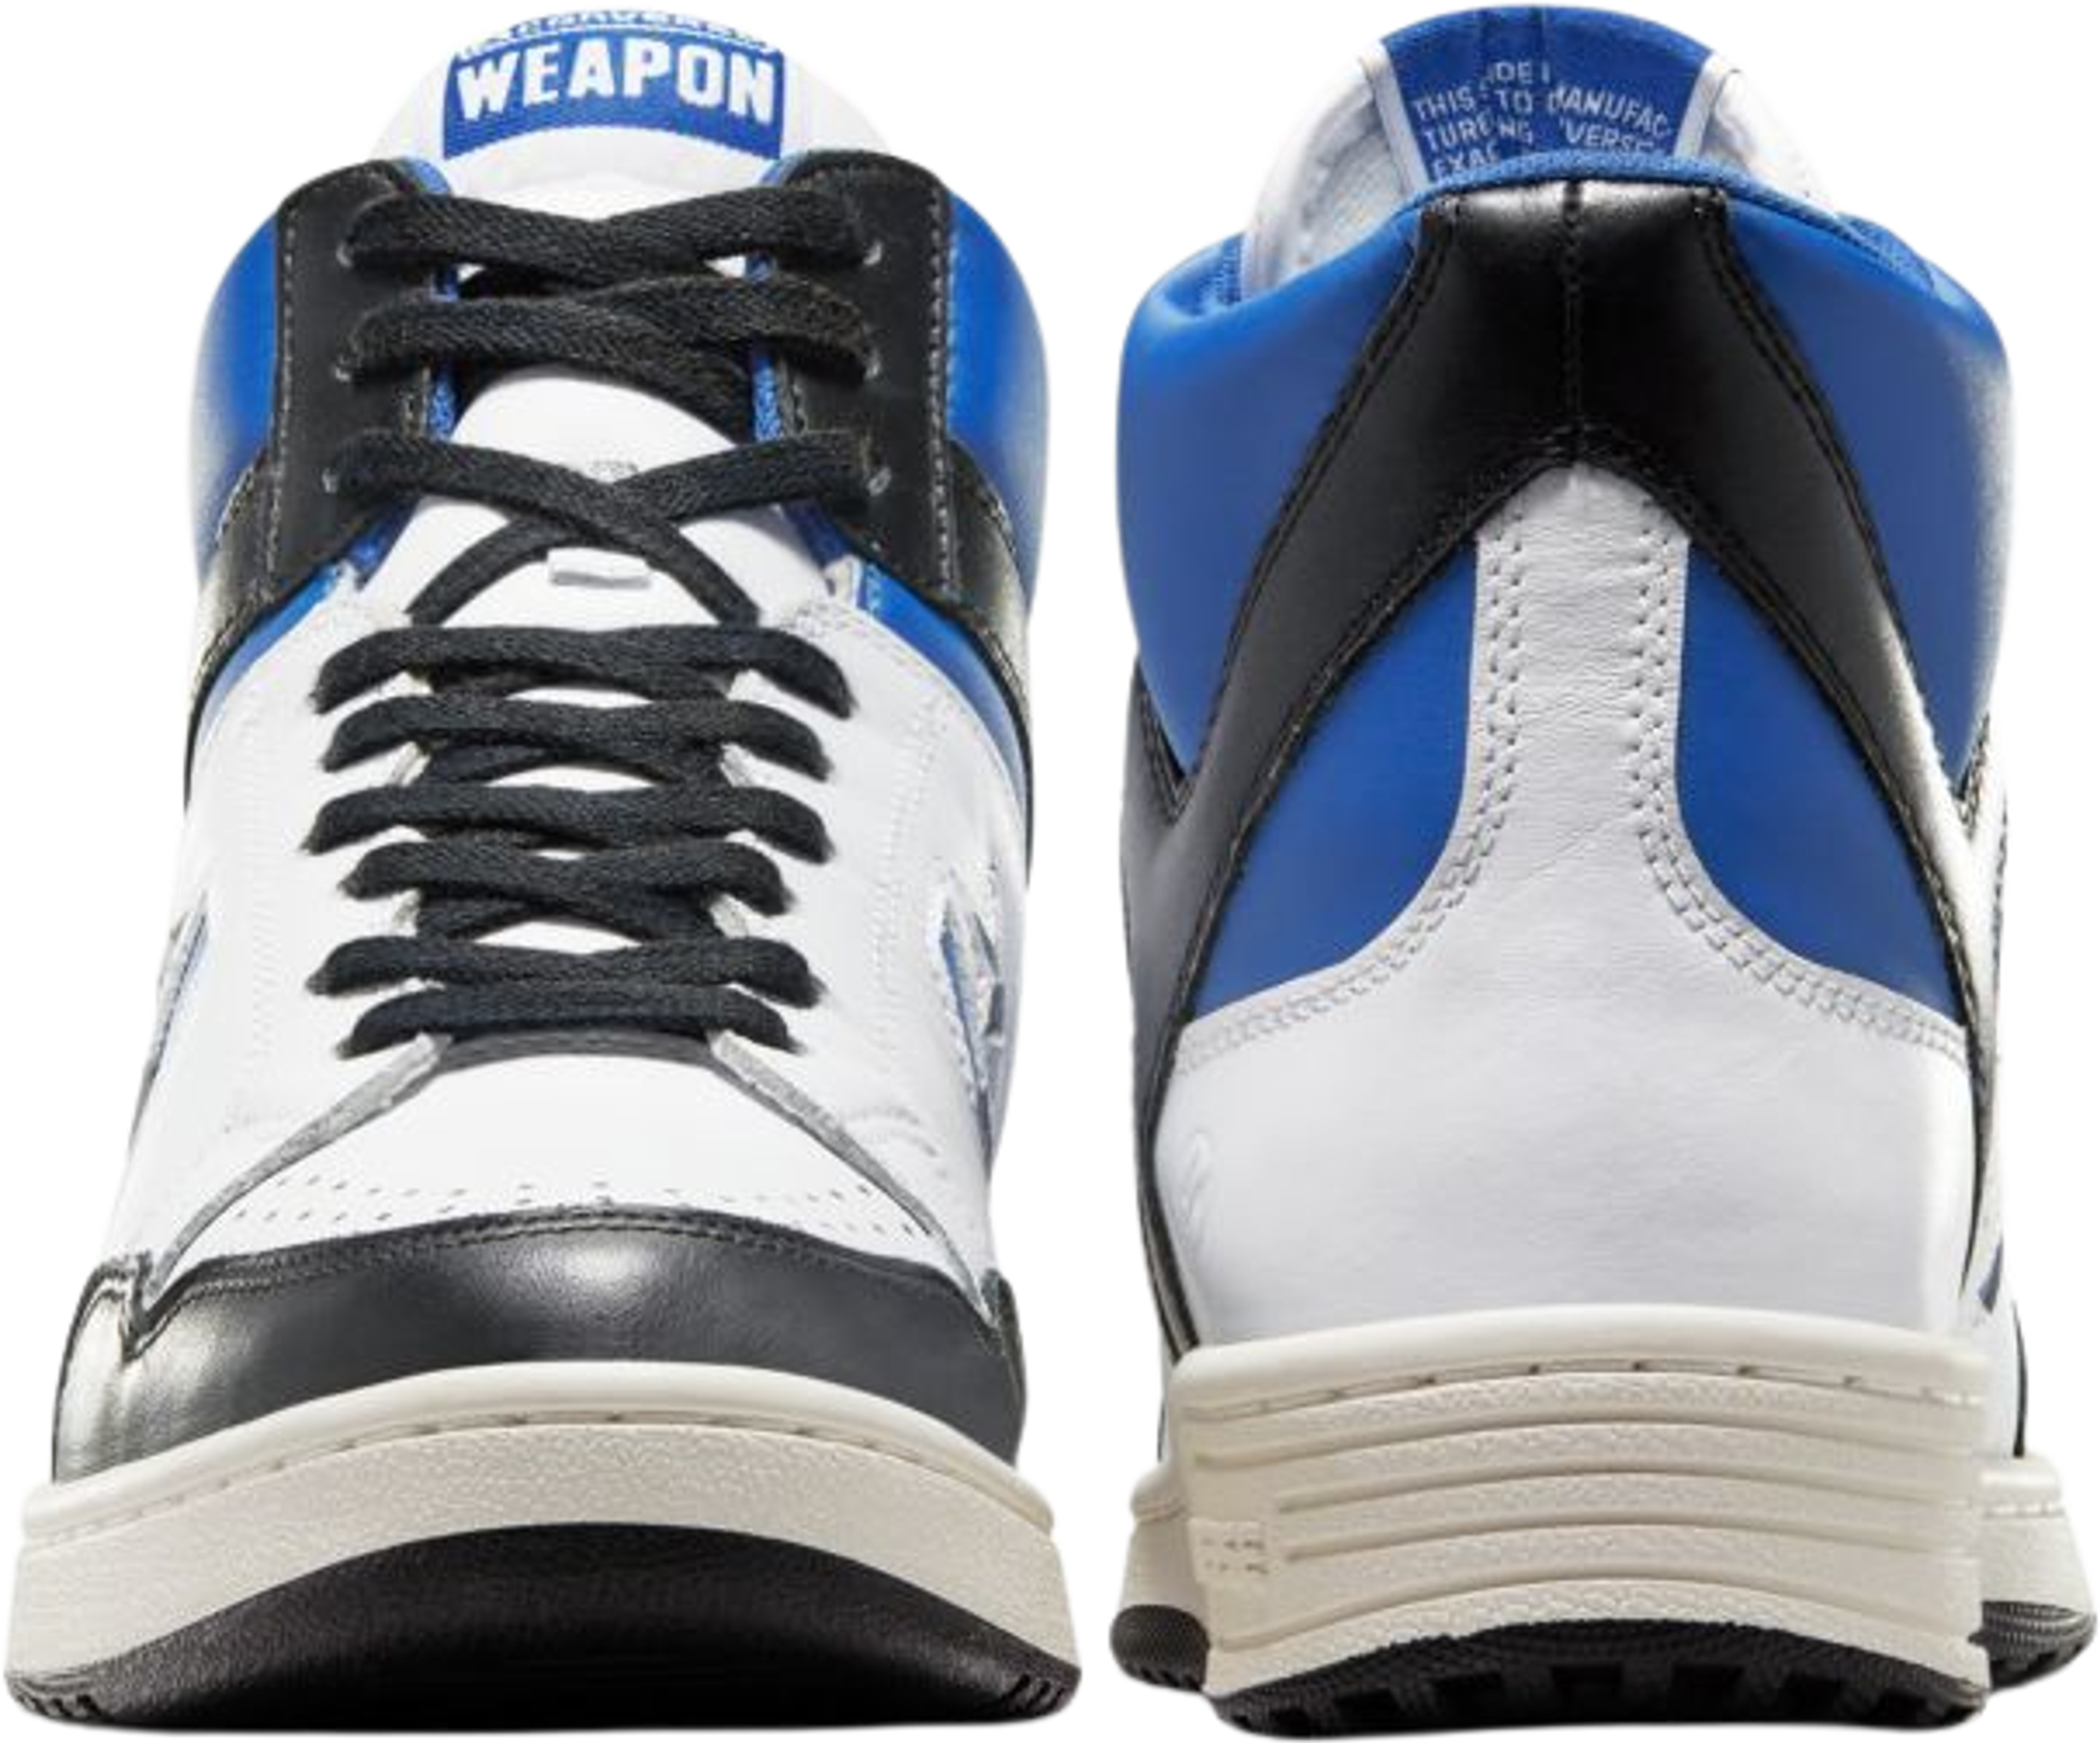 Converse X Fragment Weapon